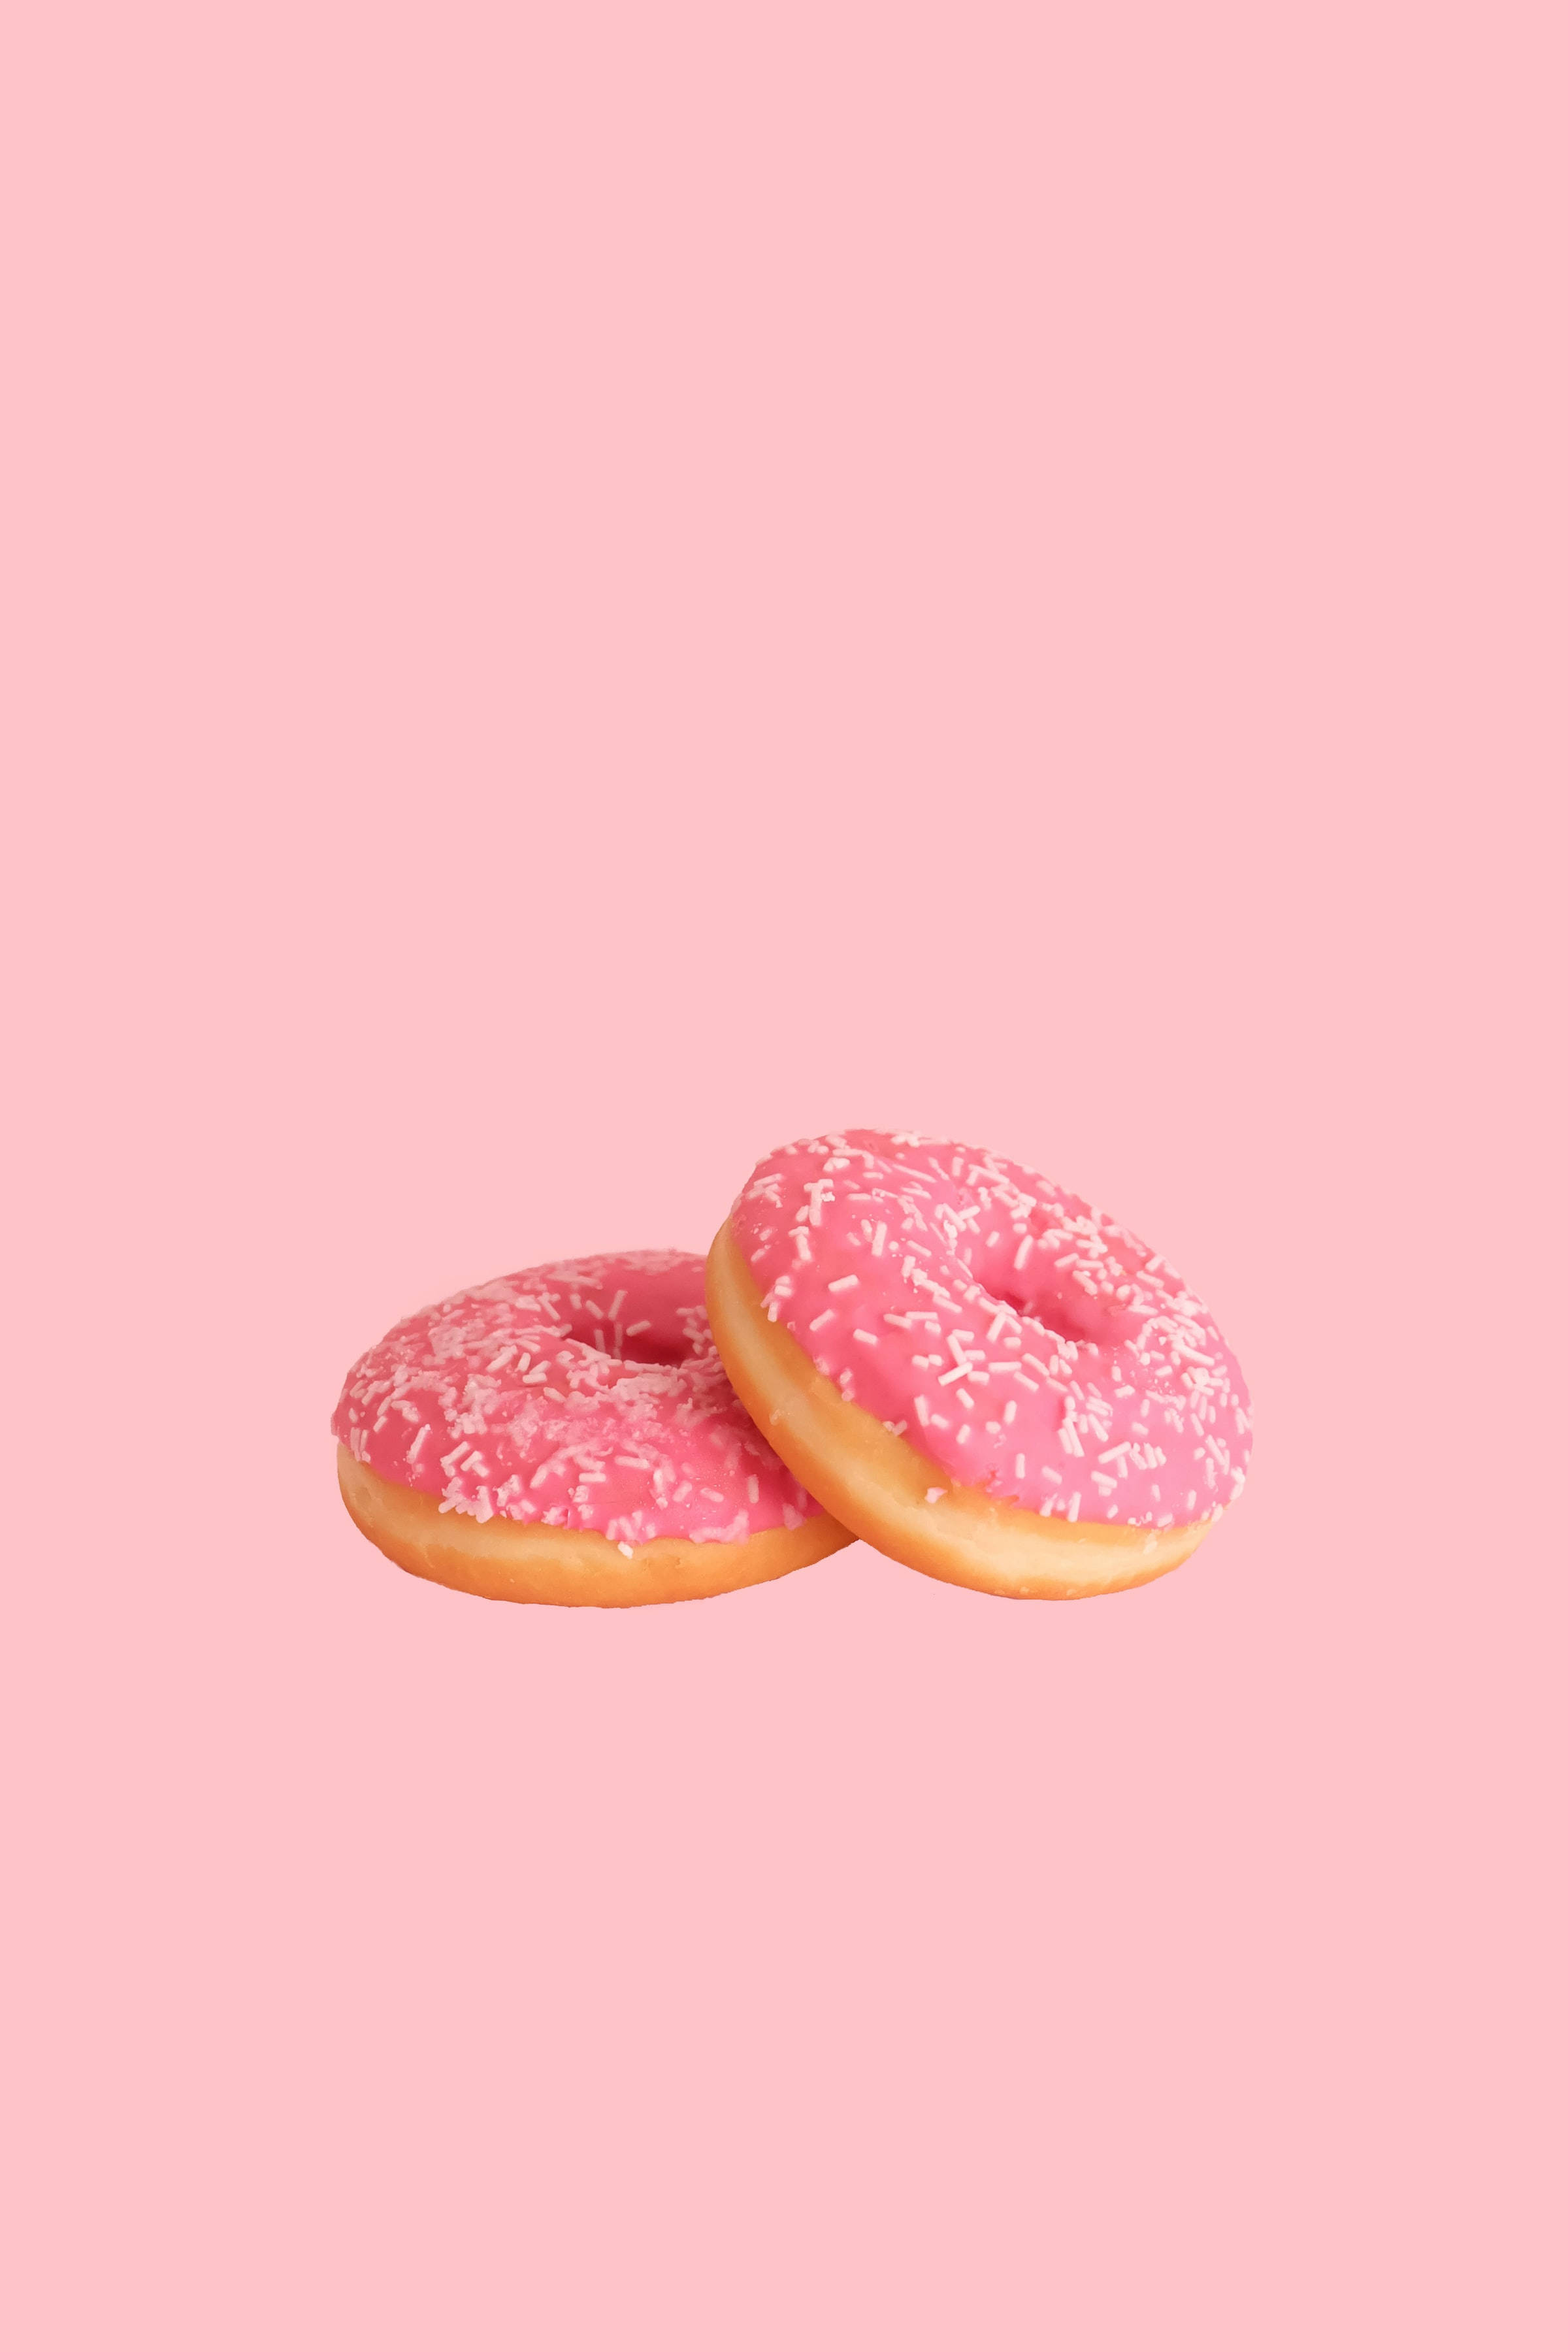 Cute Pink Aesthetic Strawberry Donuts Wallpaper